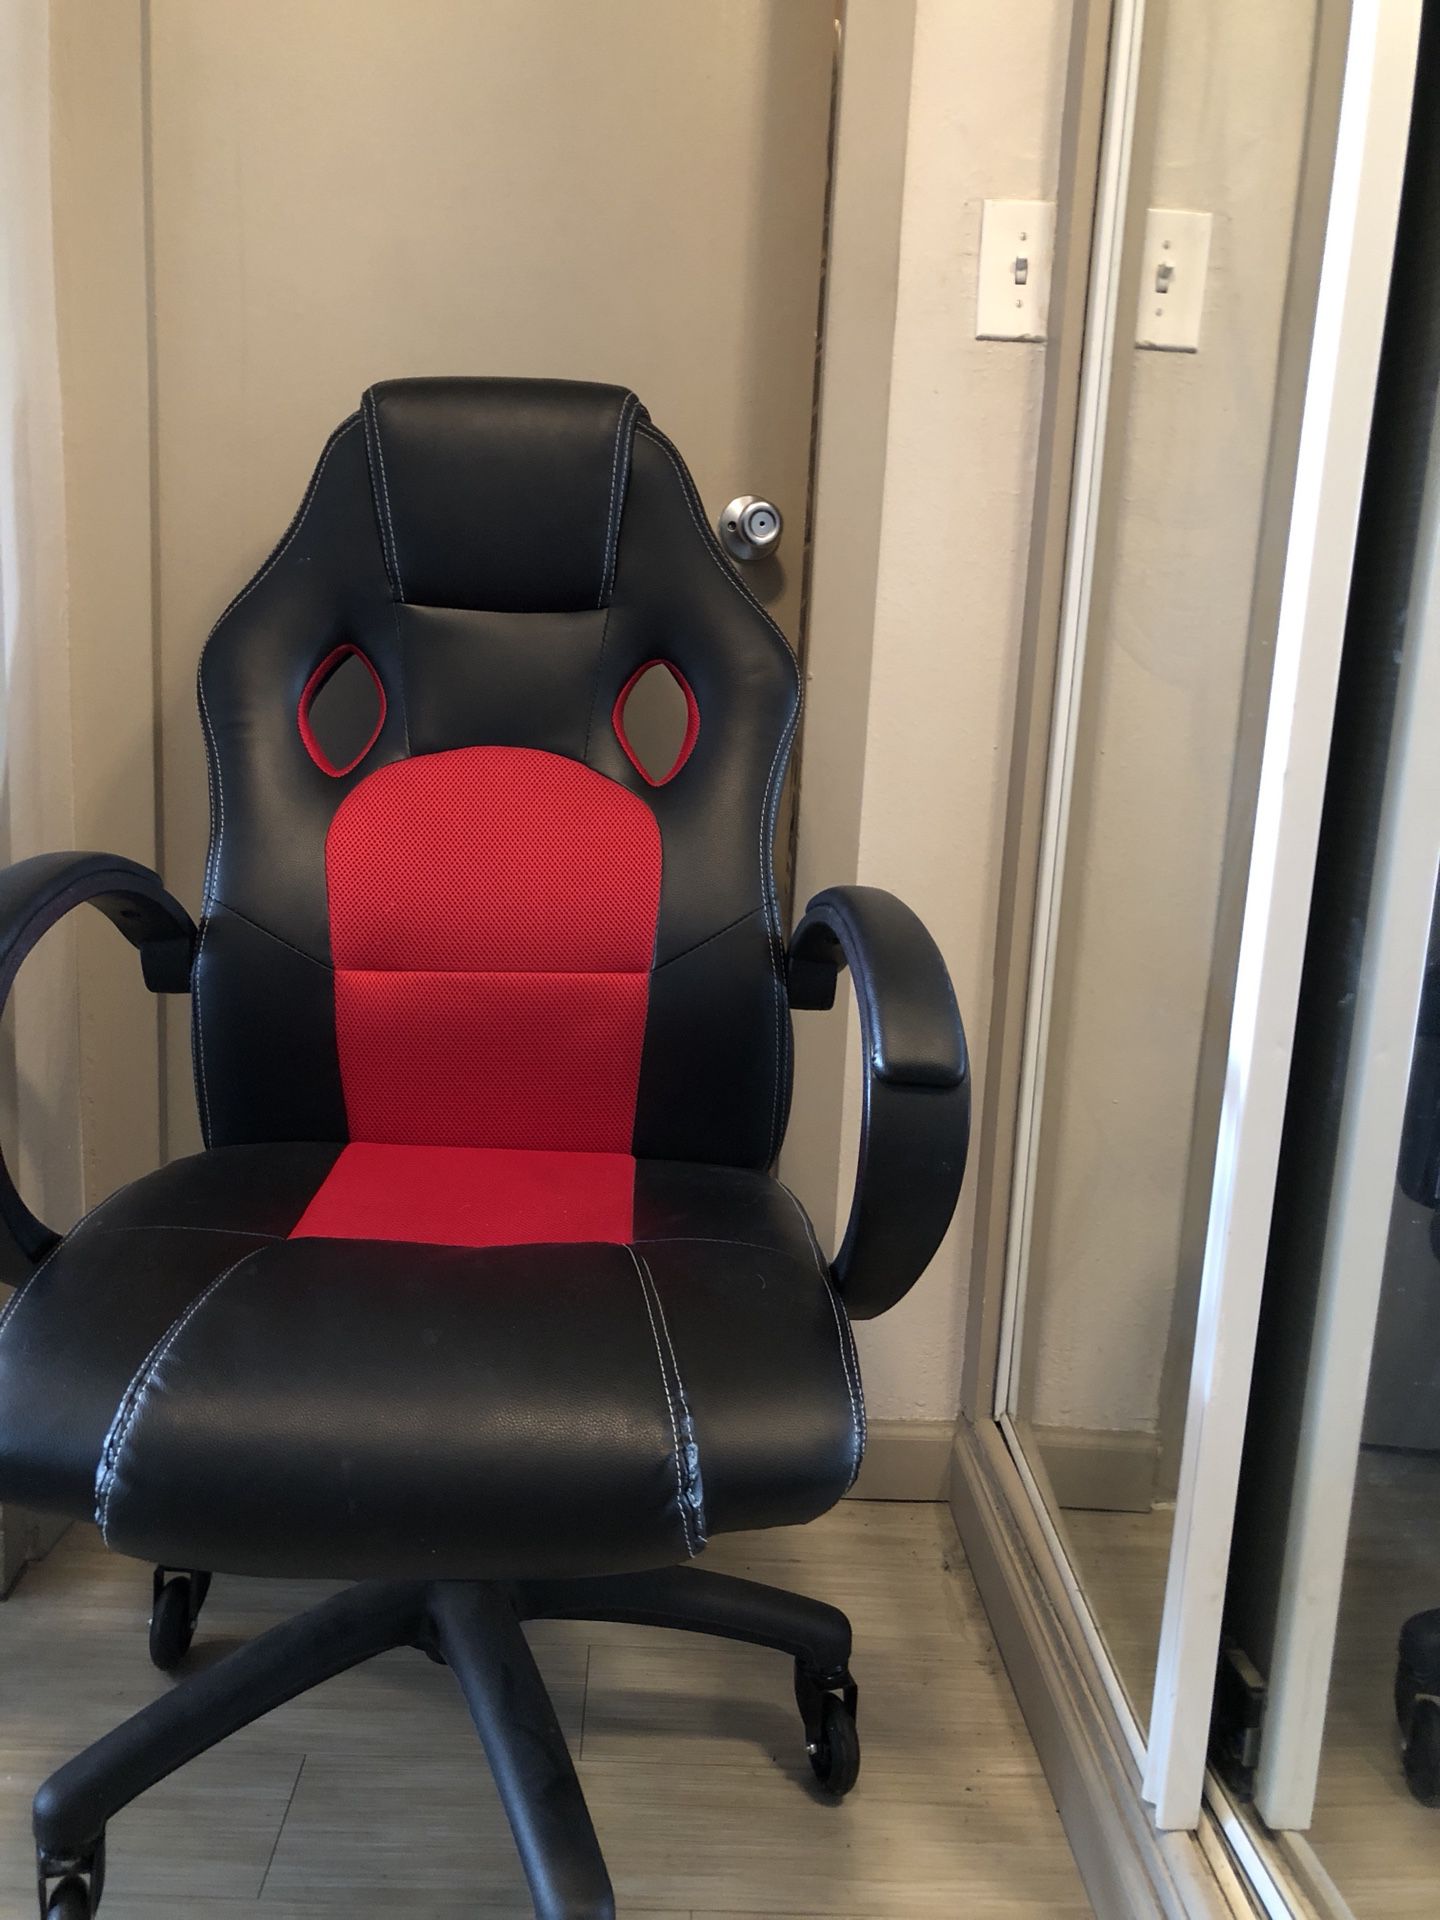 Red and black office/gaming chair